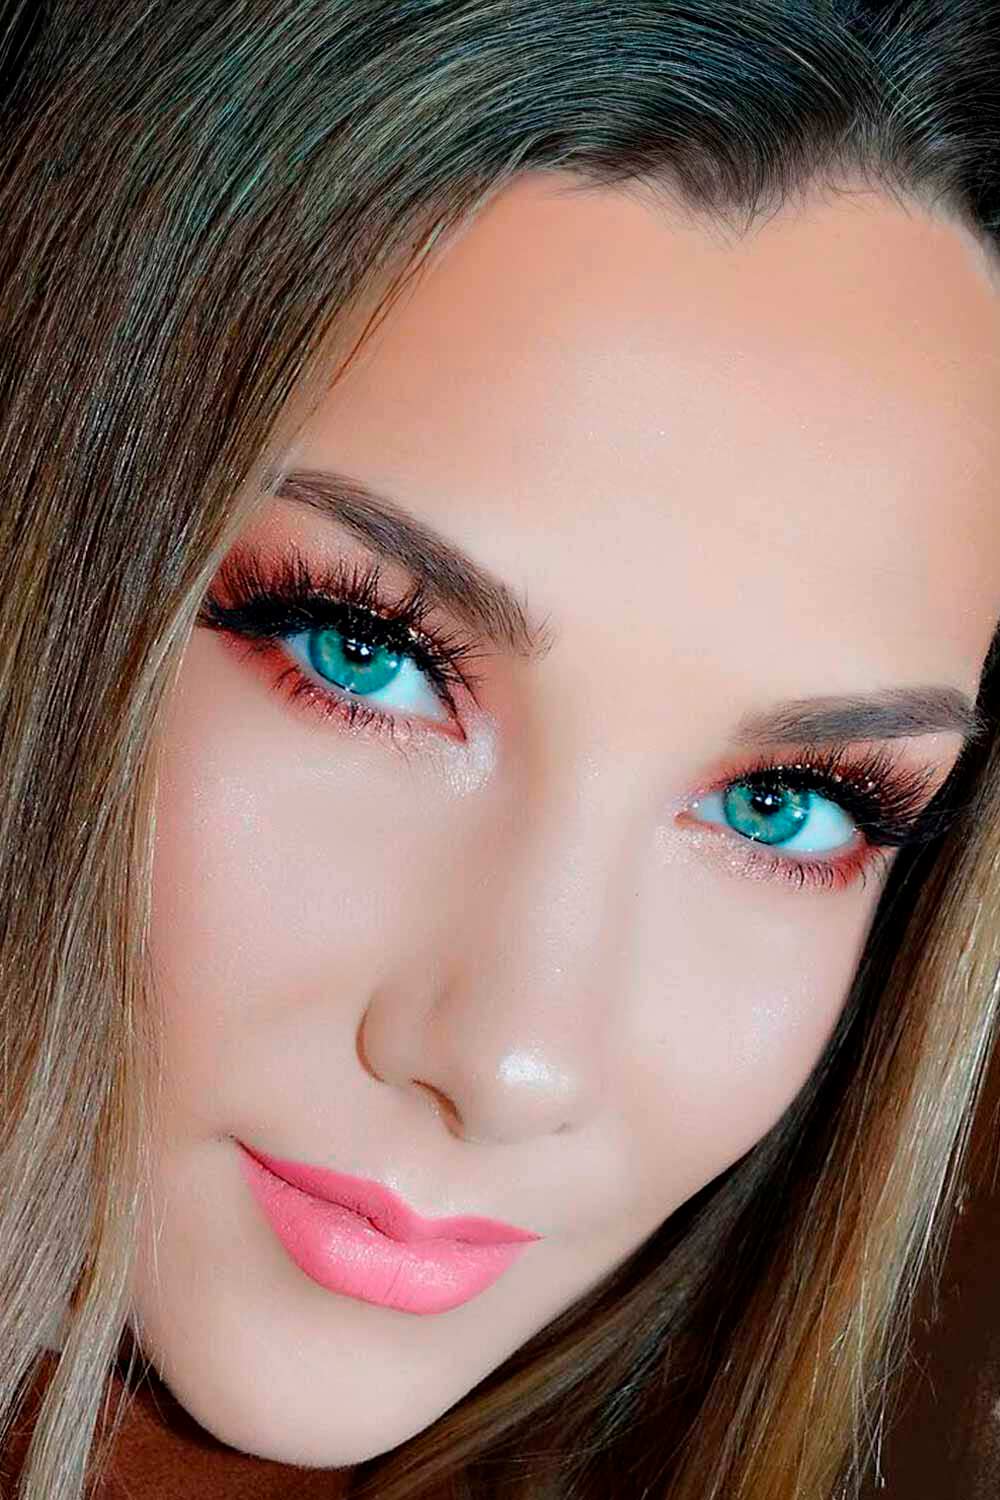 Natural Makeup For Girls With Blue Eyes